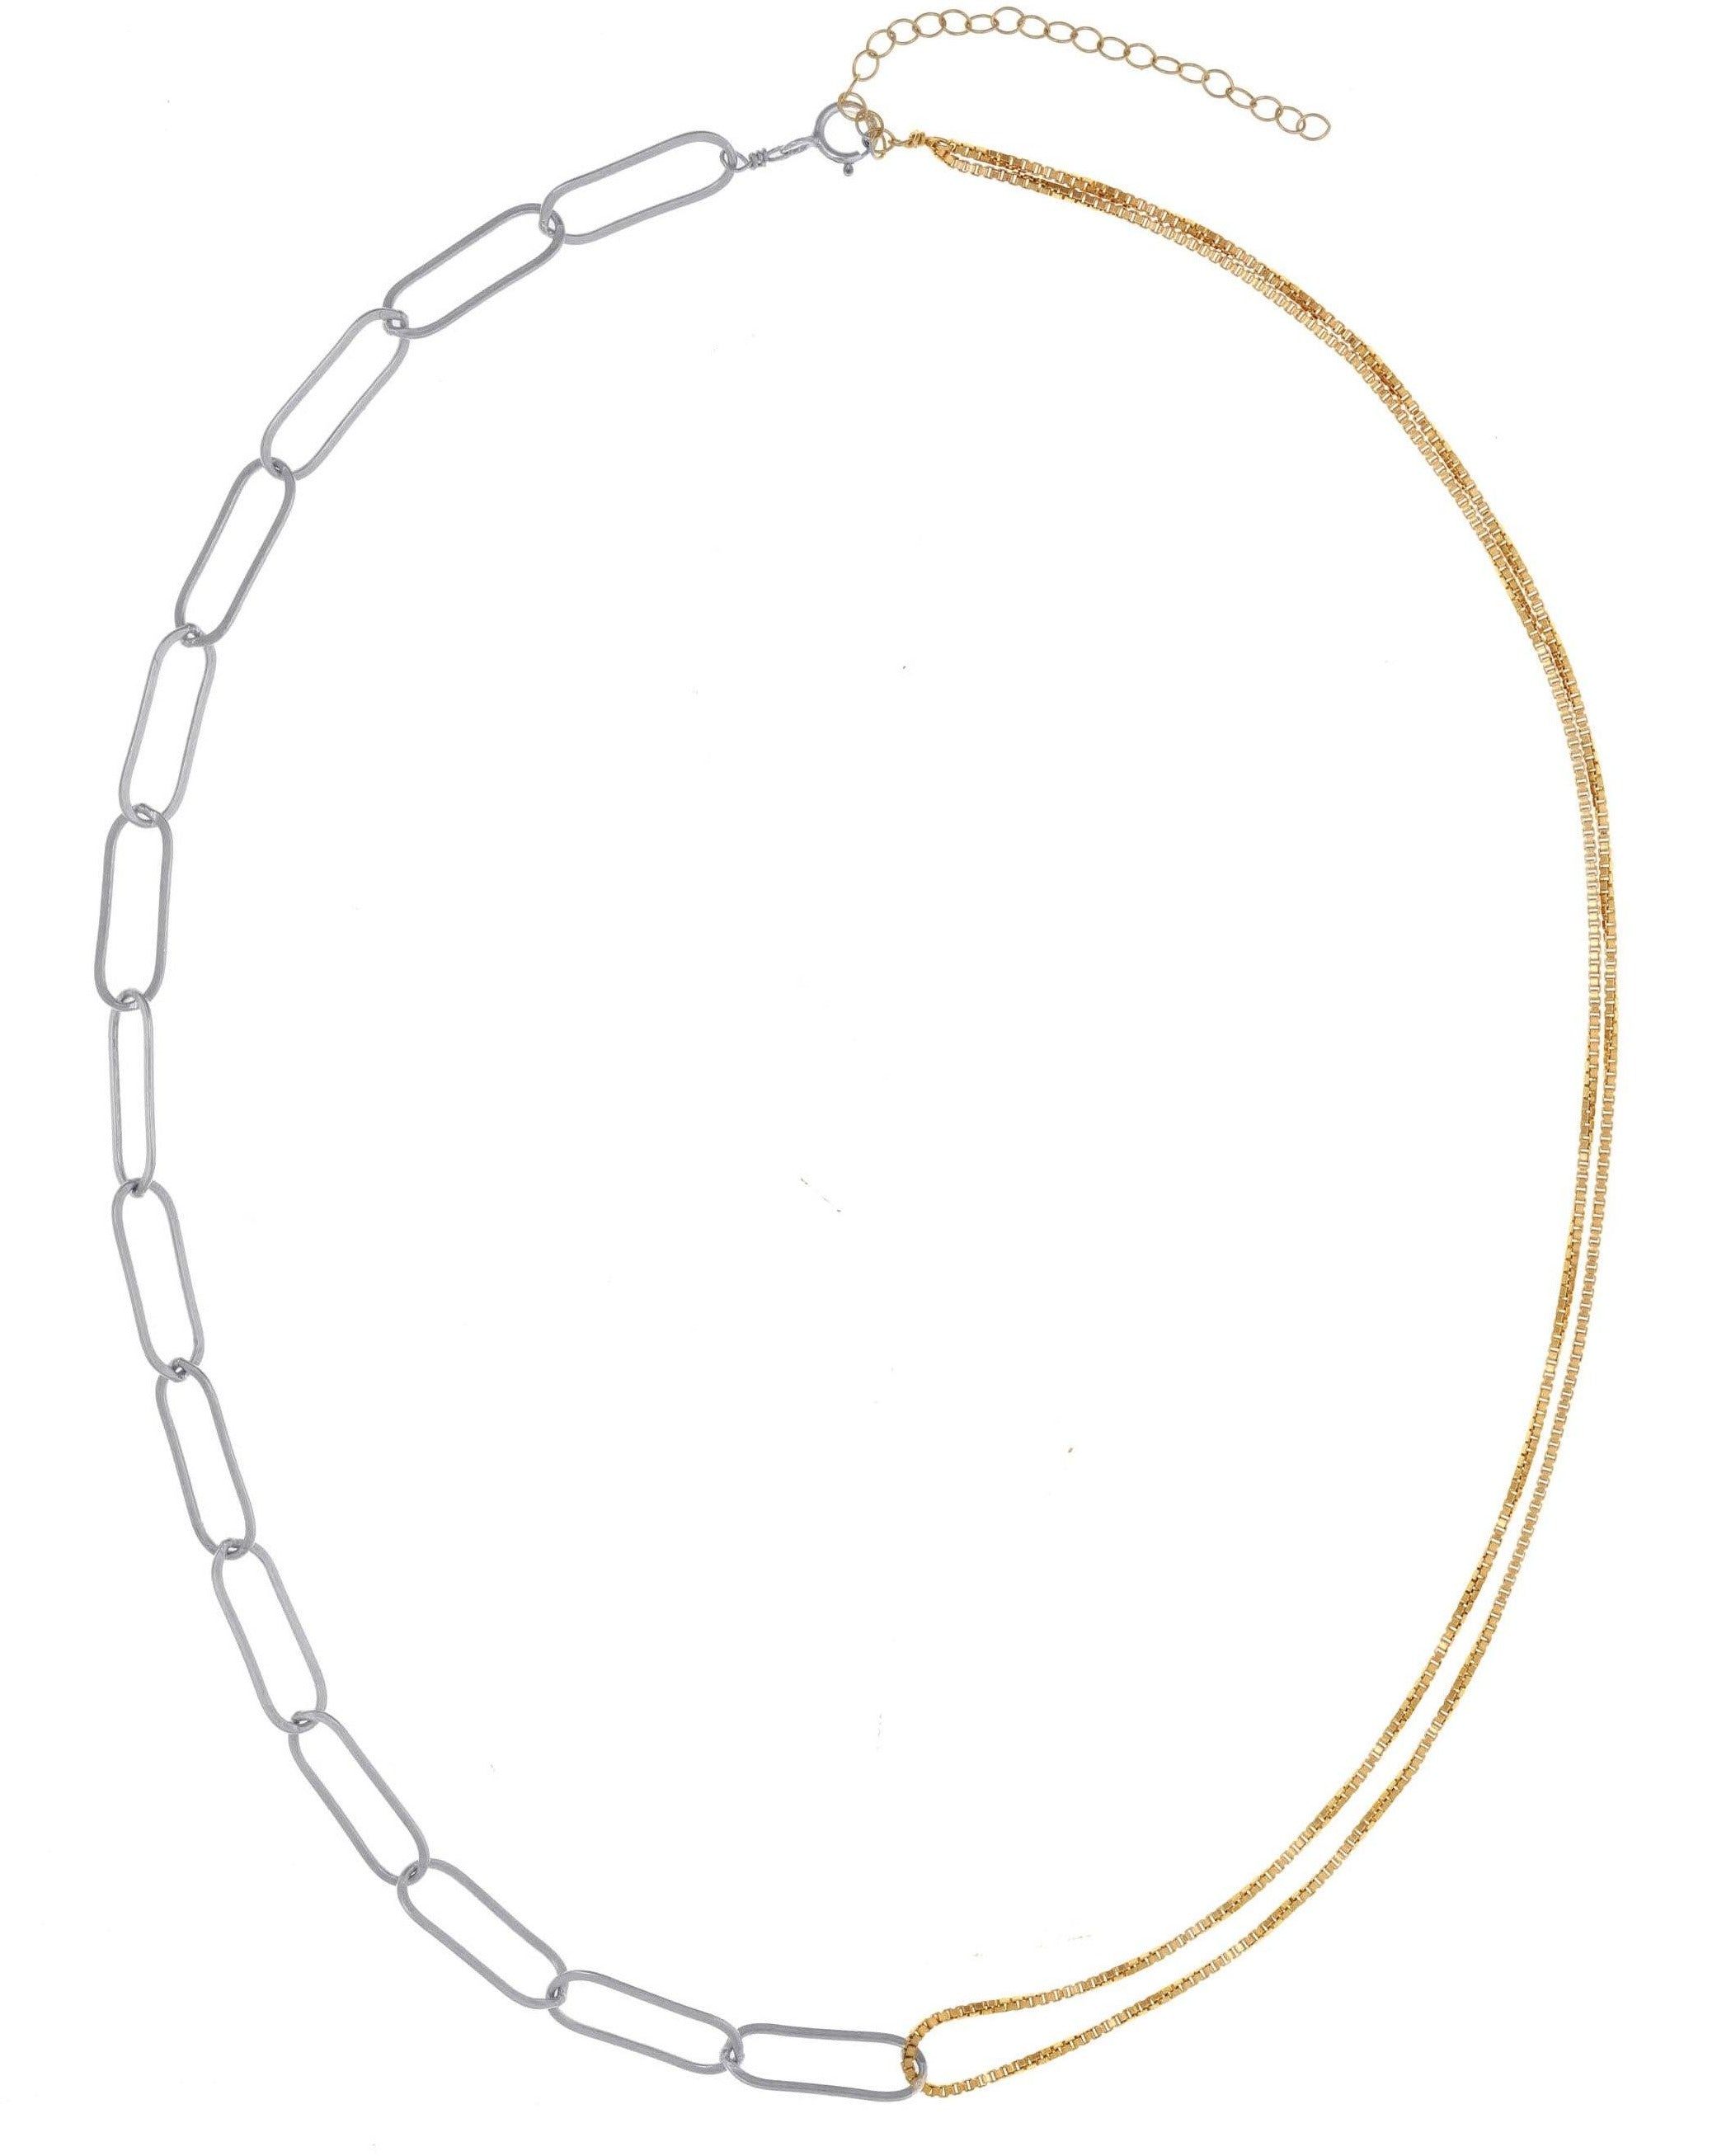 Isabella Necklace KOZAKH Isabella Necklace by KOZAKH. A 14 to 16 inch adjustable length combo chain necklace with gold box chain and silver paperclip chain. The Flat Link Chain is in Sterling Silver chain and the 1mm Box chain is in 14k Gold Filled.